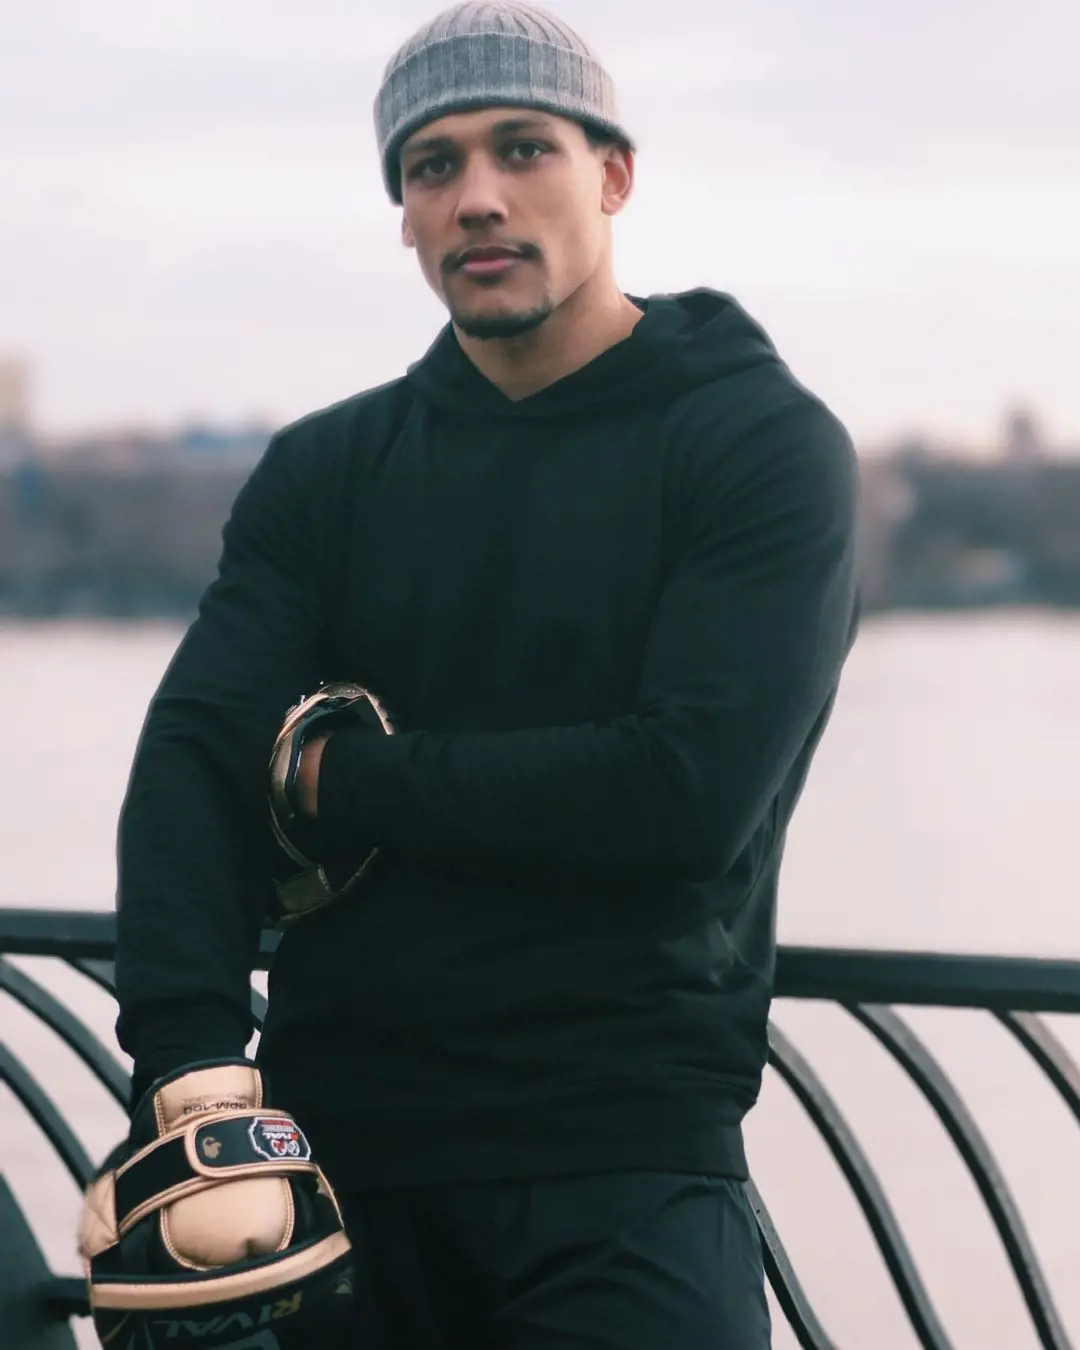 Popper clutching his boxing gloves in New York City on March 4, 2021